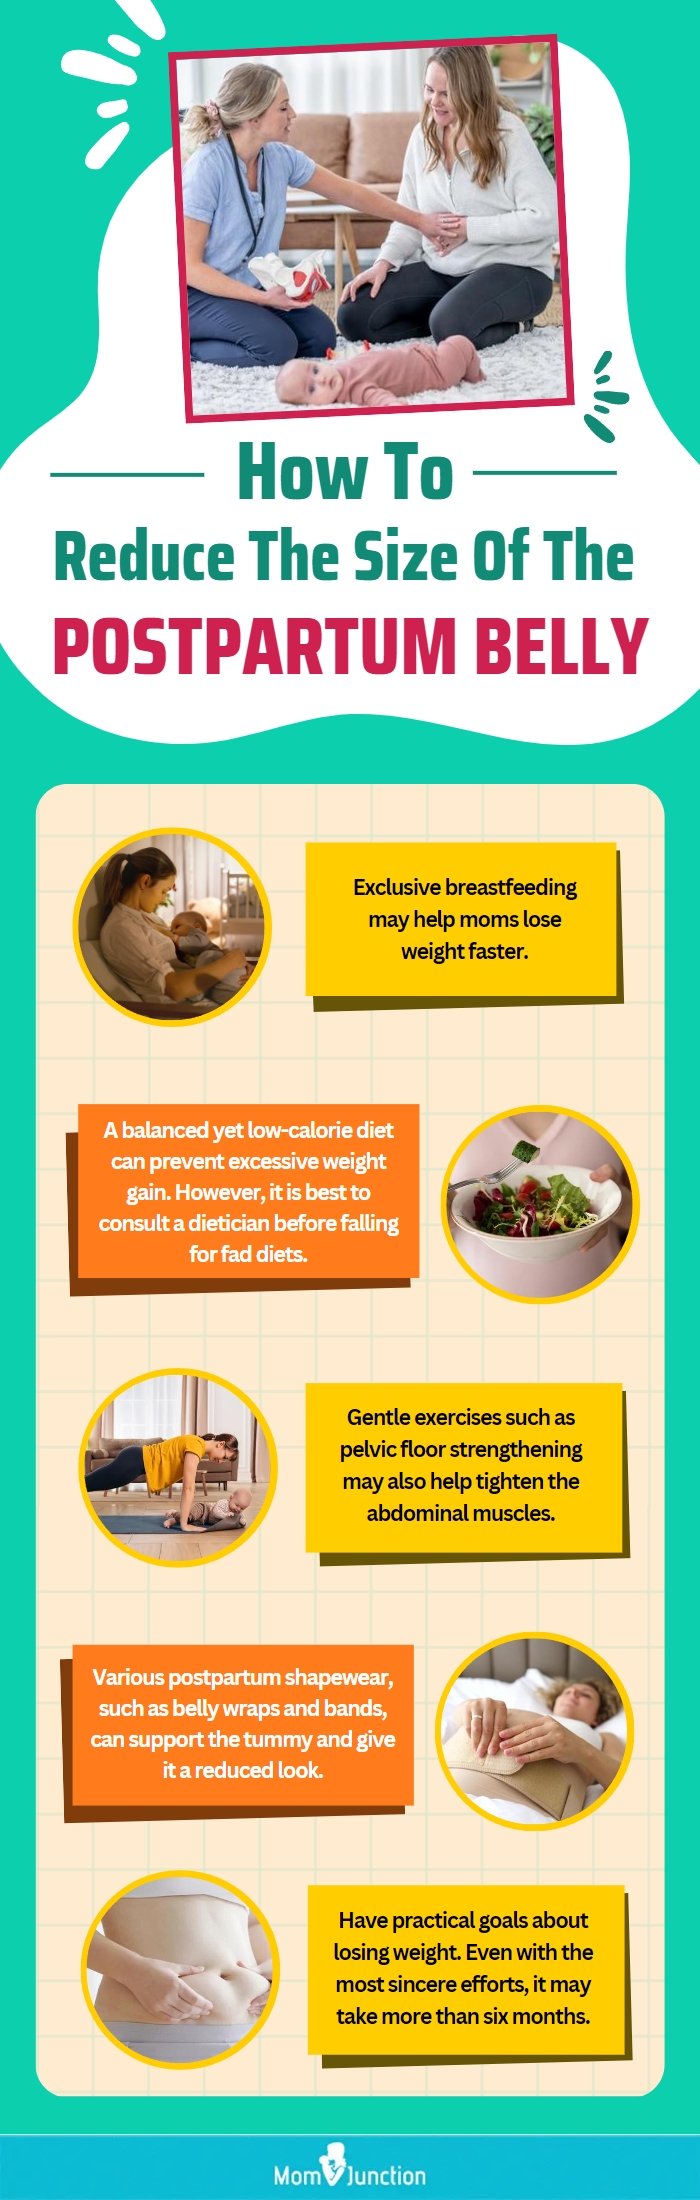 how to reduce the size of the postpartum belly(infographic)